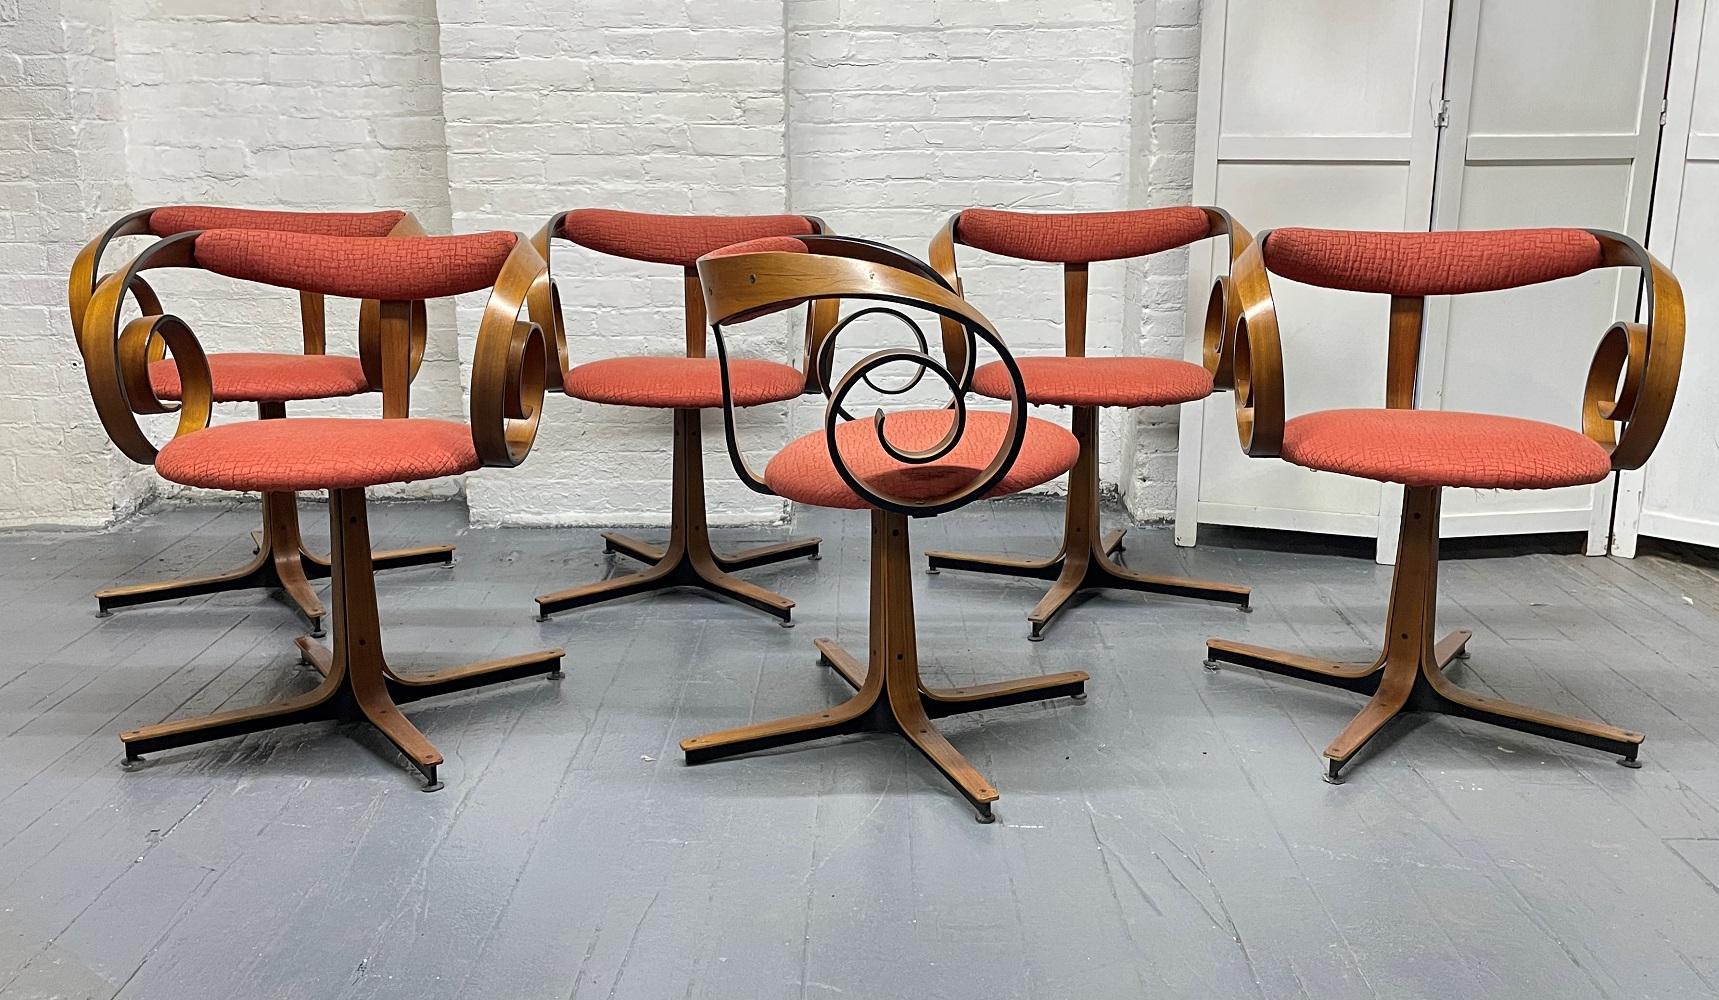 Set of 6 George Mulhauser swivel chairs for Plycraft. Walnut frames with fabric covered seats. Scrolled arms.